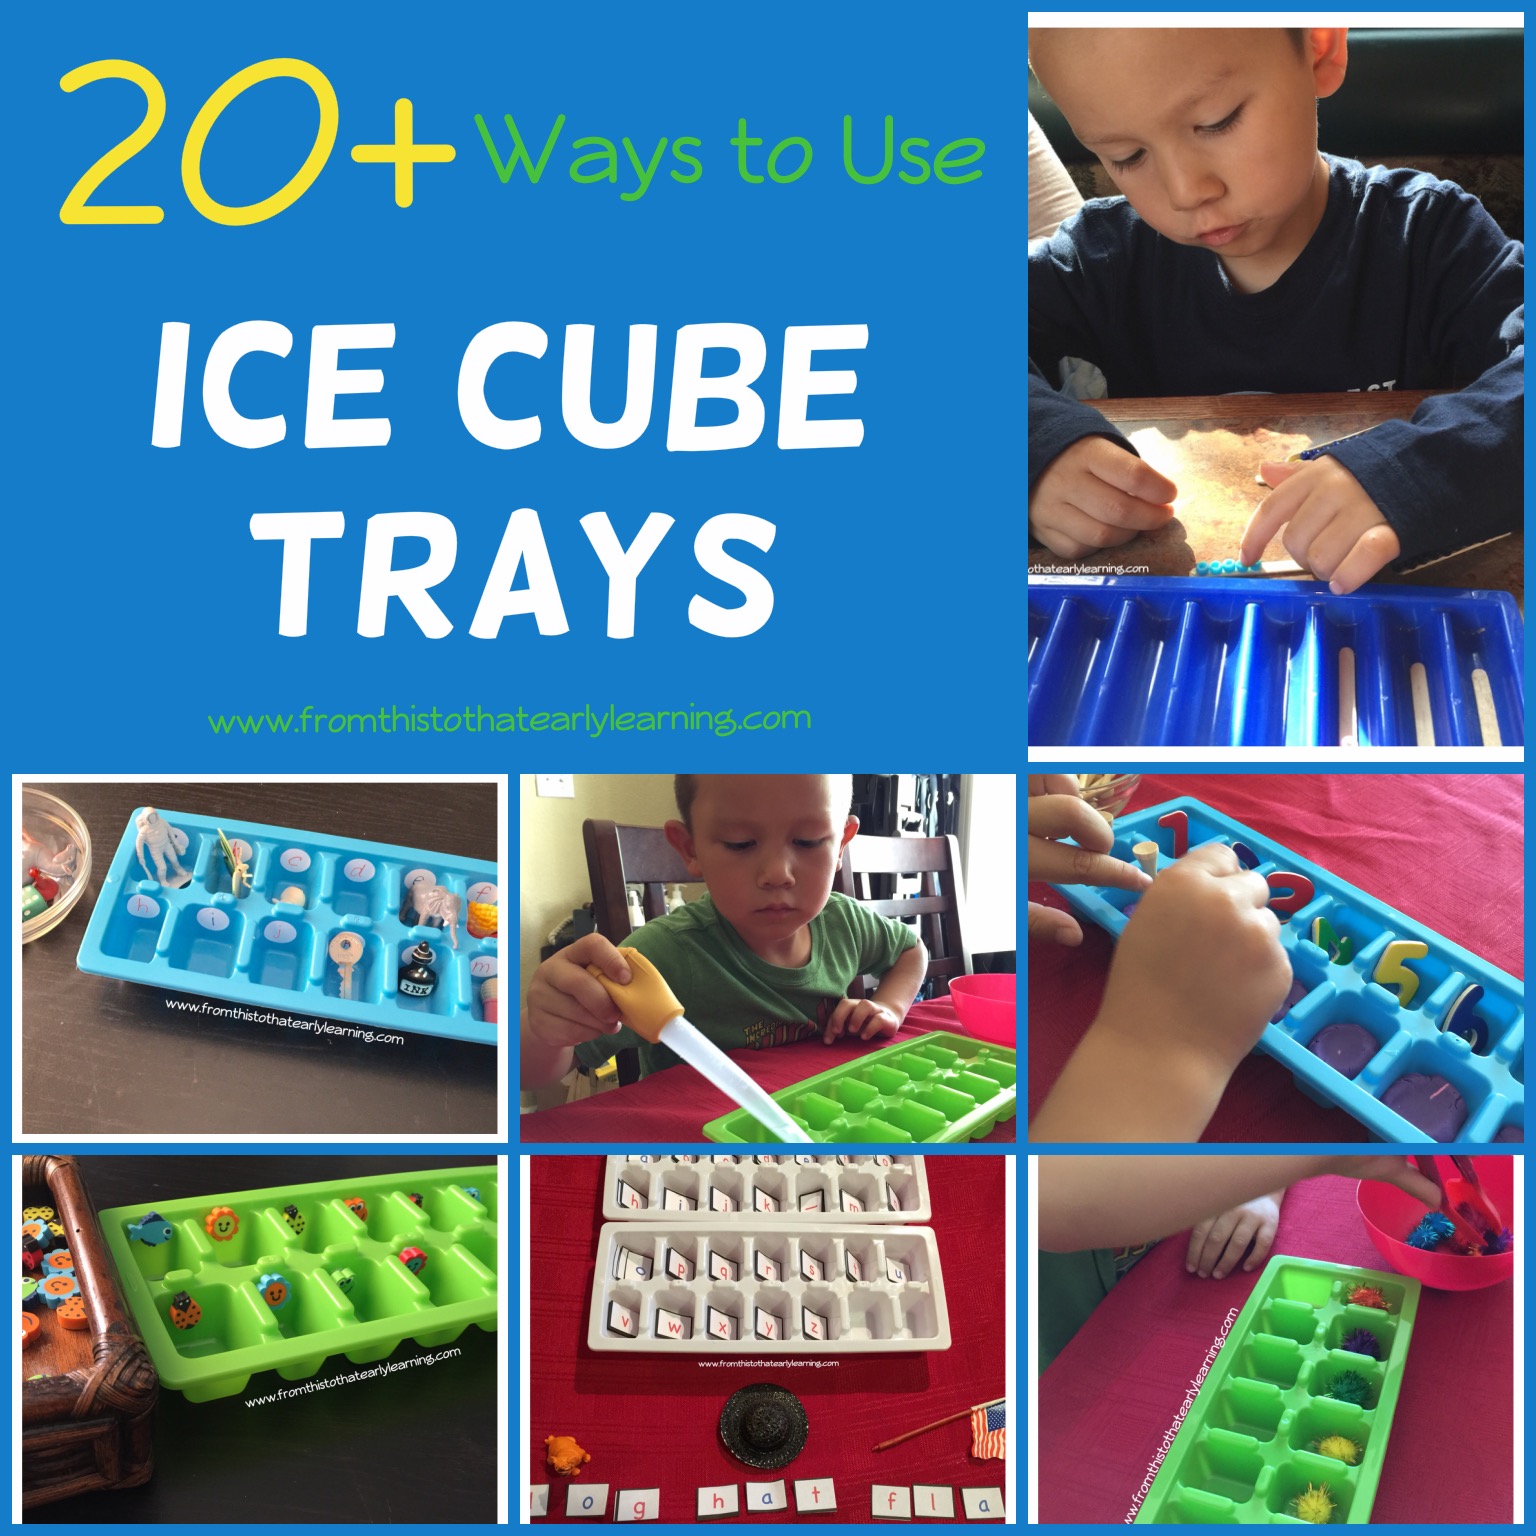 20 Unusual and Creative Ice Cube Trays